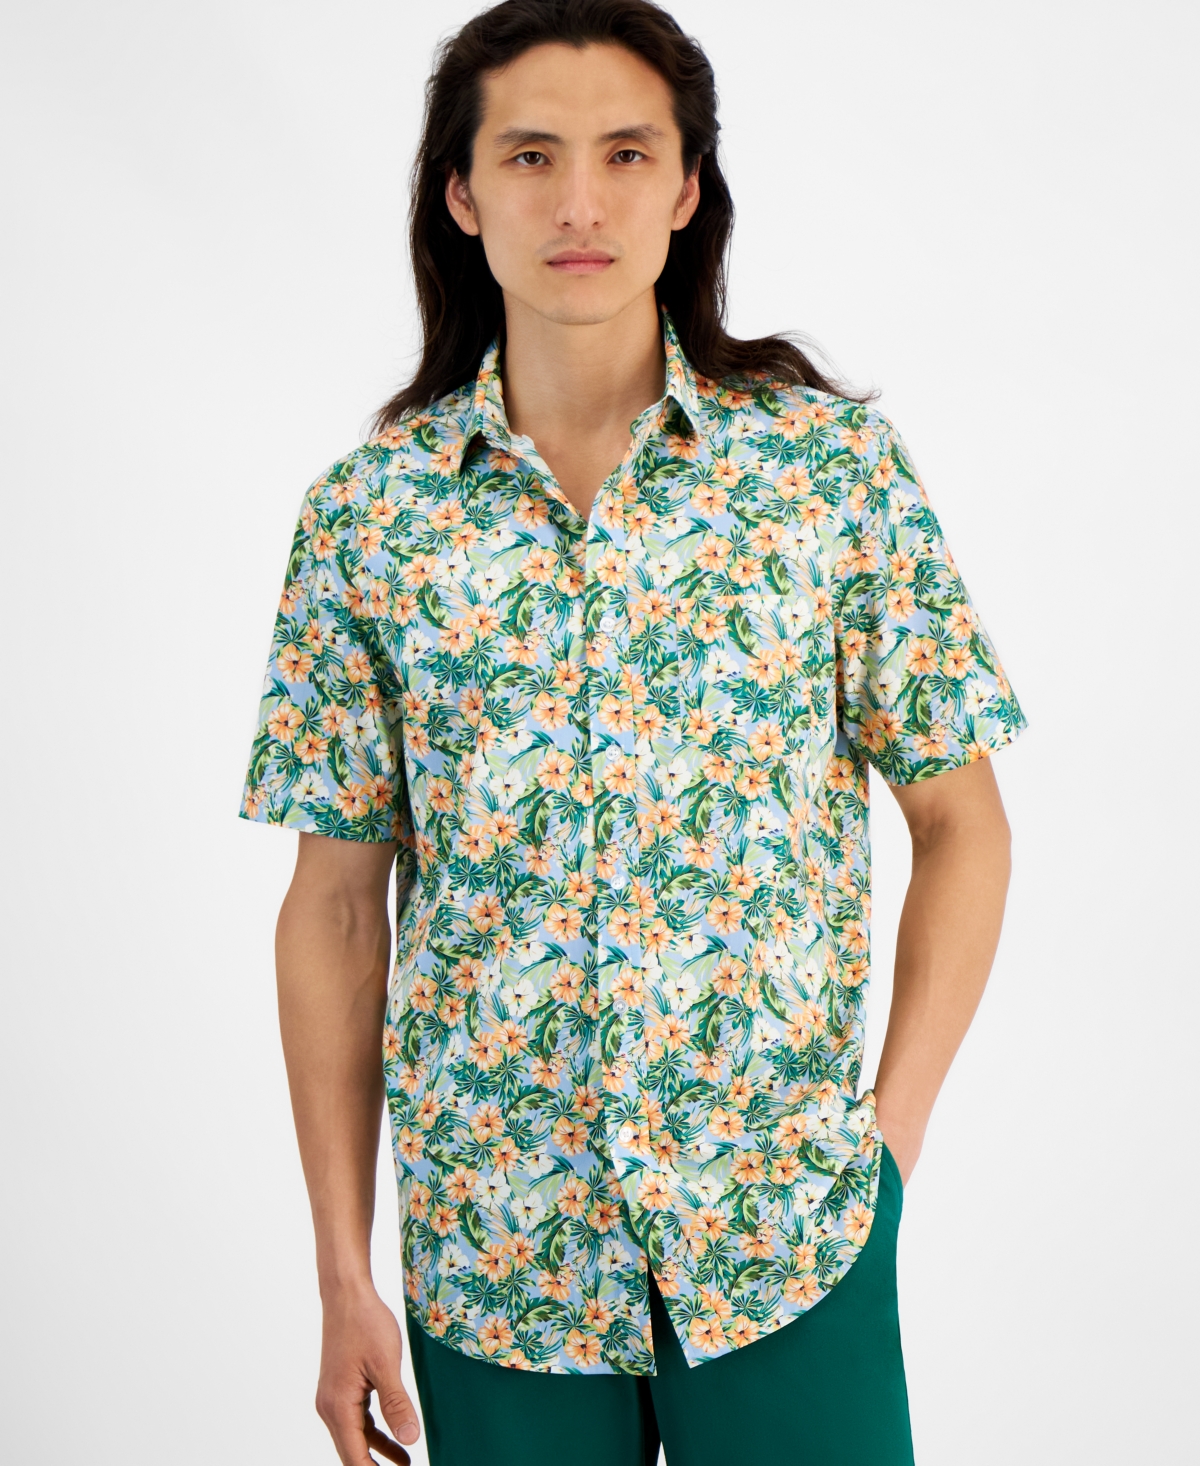 Men's Libra Regular-Fit Stretch Floral Button-Down Poplin Shirt, Created for Macy's - Pale Ink Blue